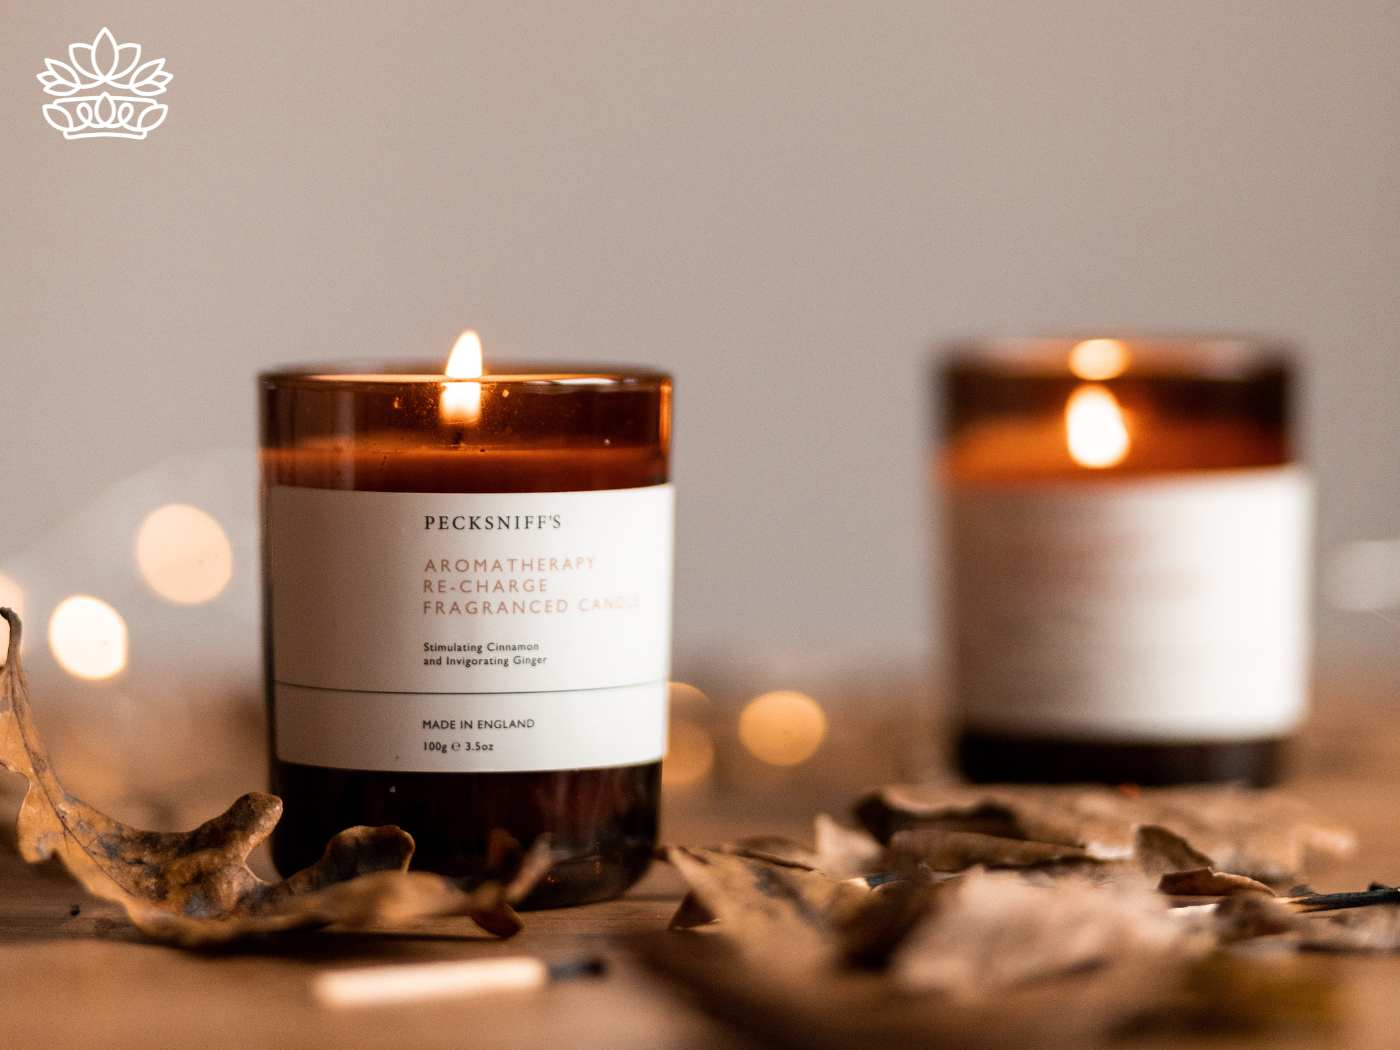 Illuminated aromatherapy candles, a serene addition to any Christmas gift ideas, perfect for a family member to enrich life's moments, alongside gifts for kids and coffee lovers, from the seasonal selection at Fabulous Flowers and Gifts.